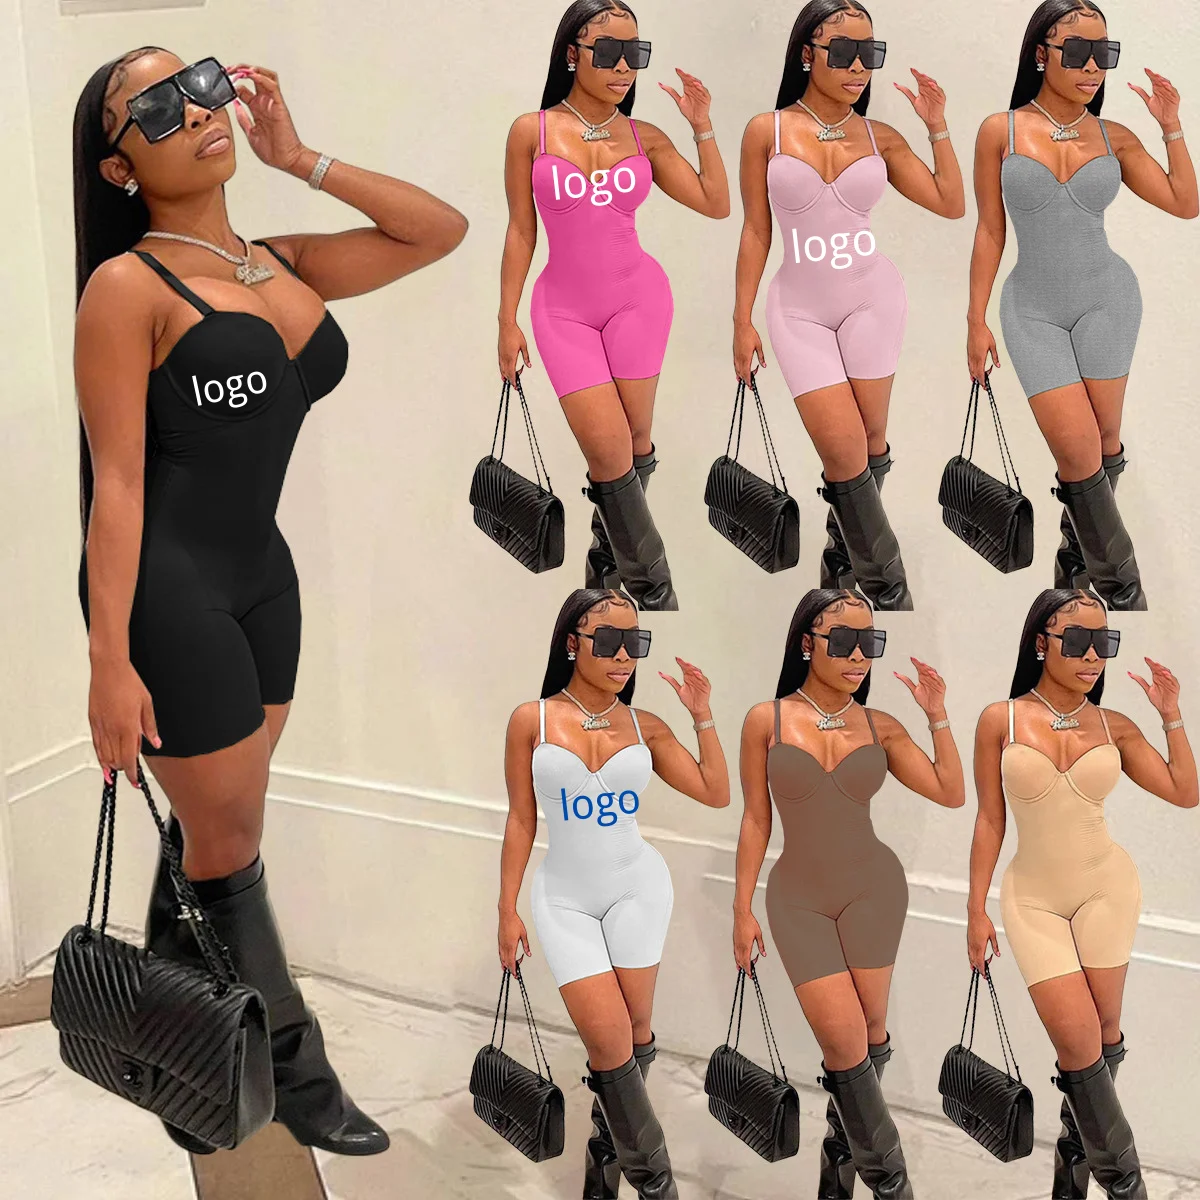 

Summer New Sexy Low Cut Sleeveless Solid Color Spaghetti Strap Cami Jumpsuit Women High Waist Bodycon Jumpsuits Playsuits, Picture shows